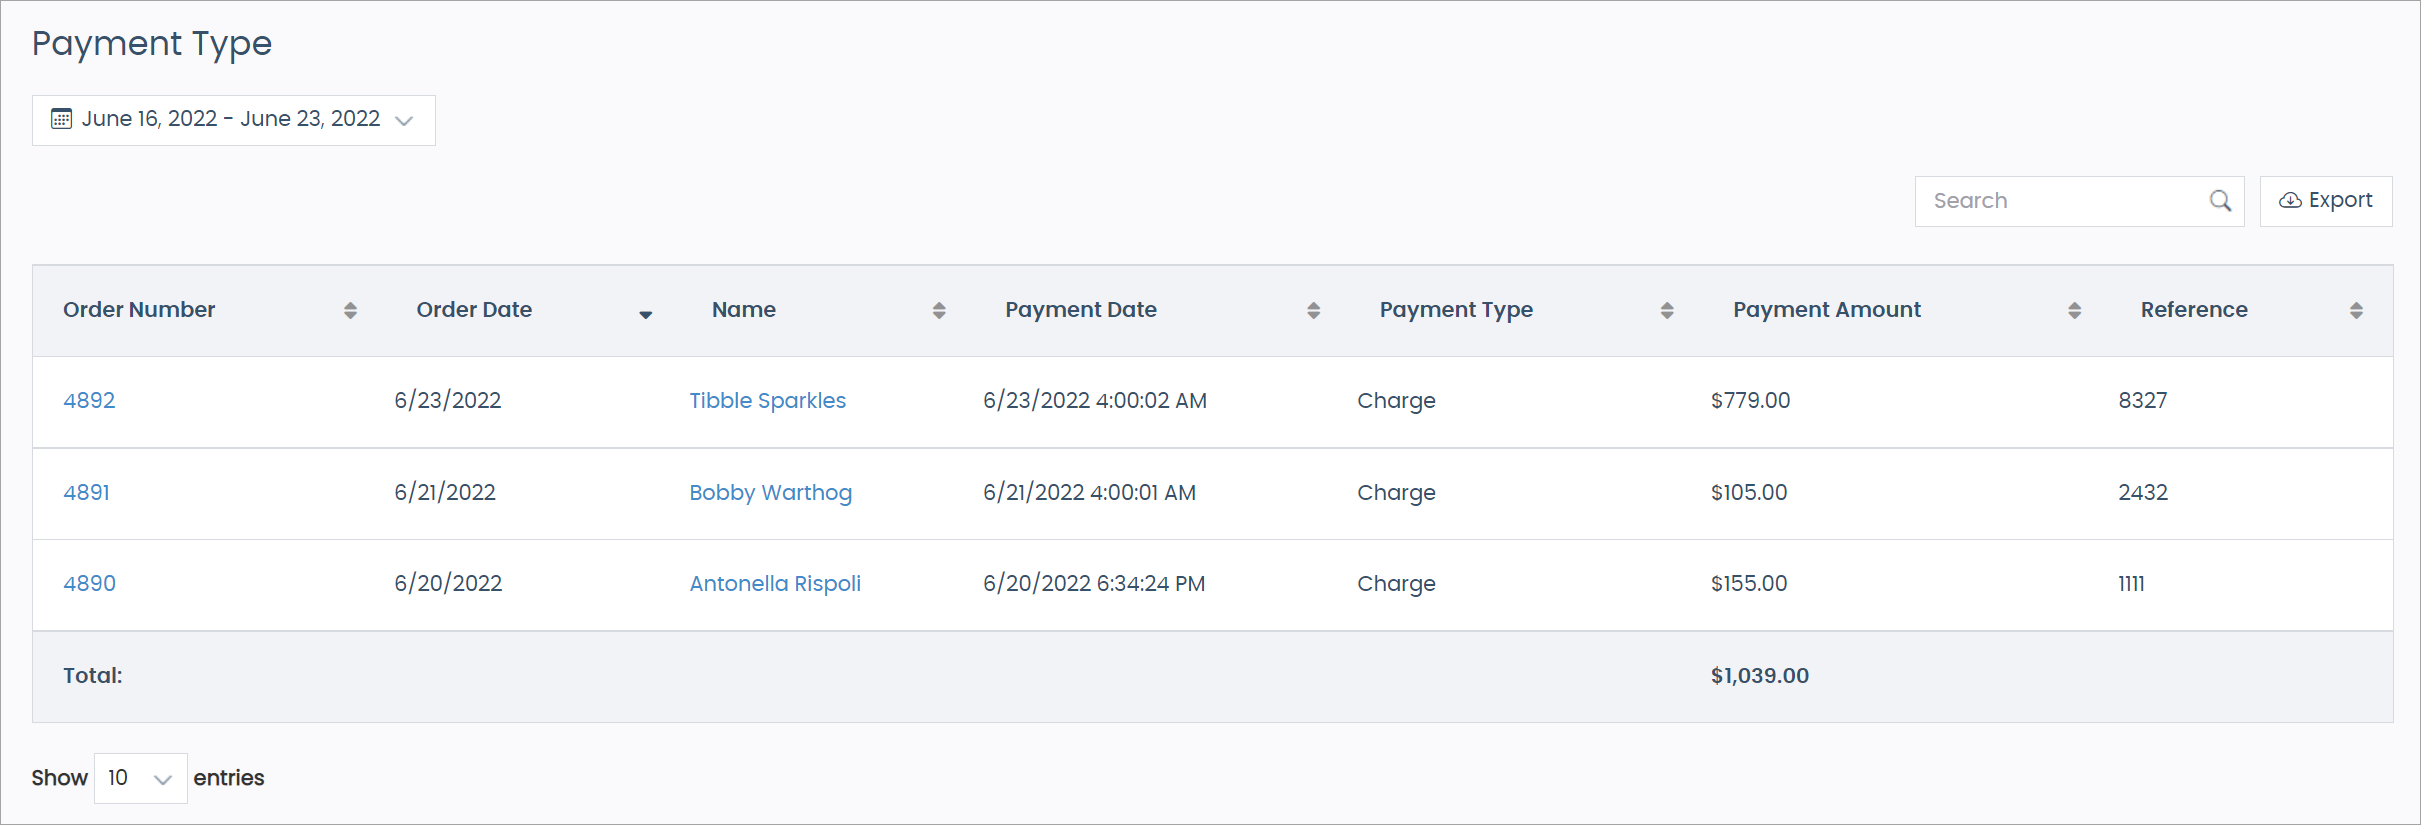 Payment Type report